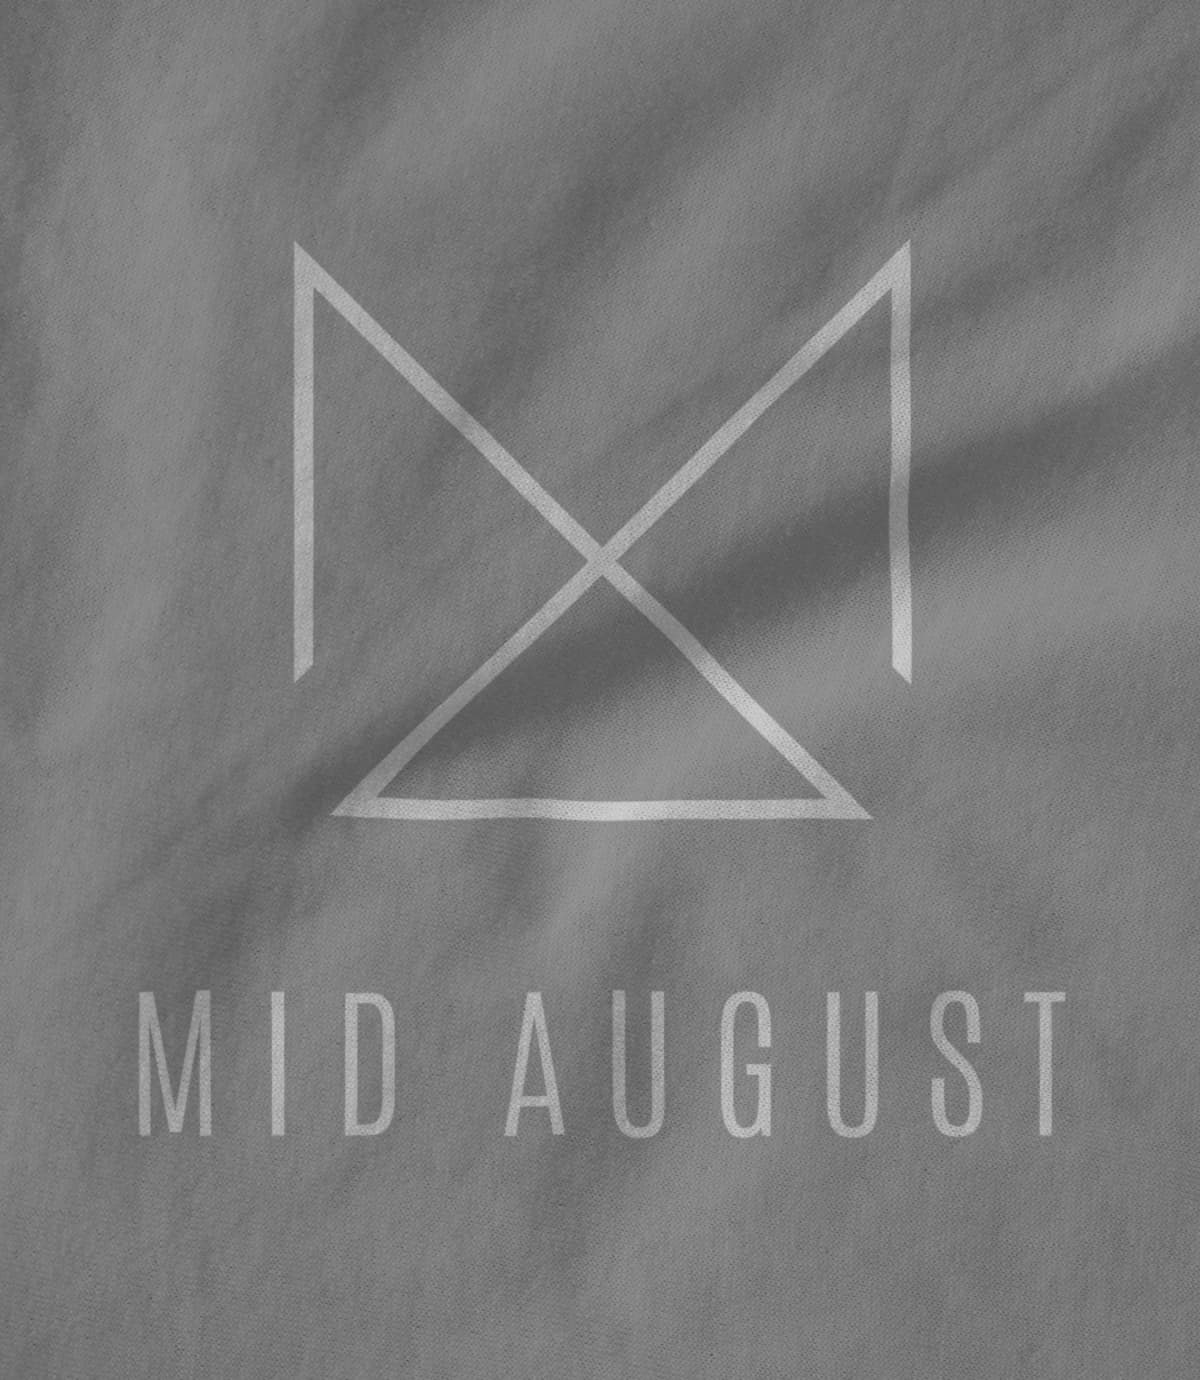 Mid August